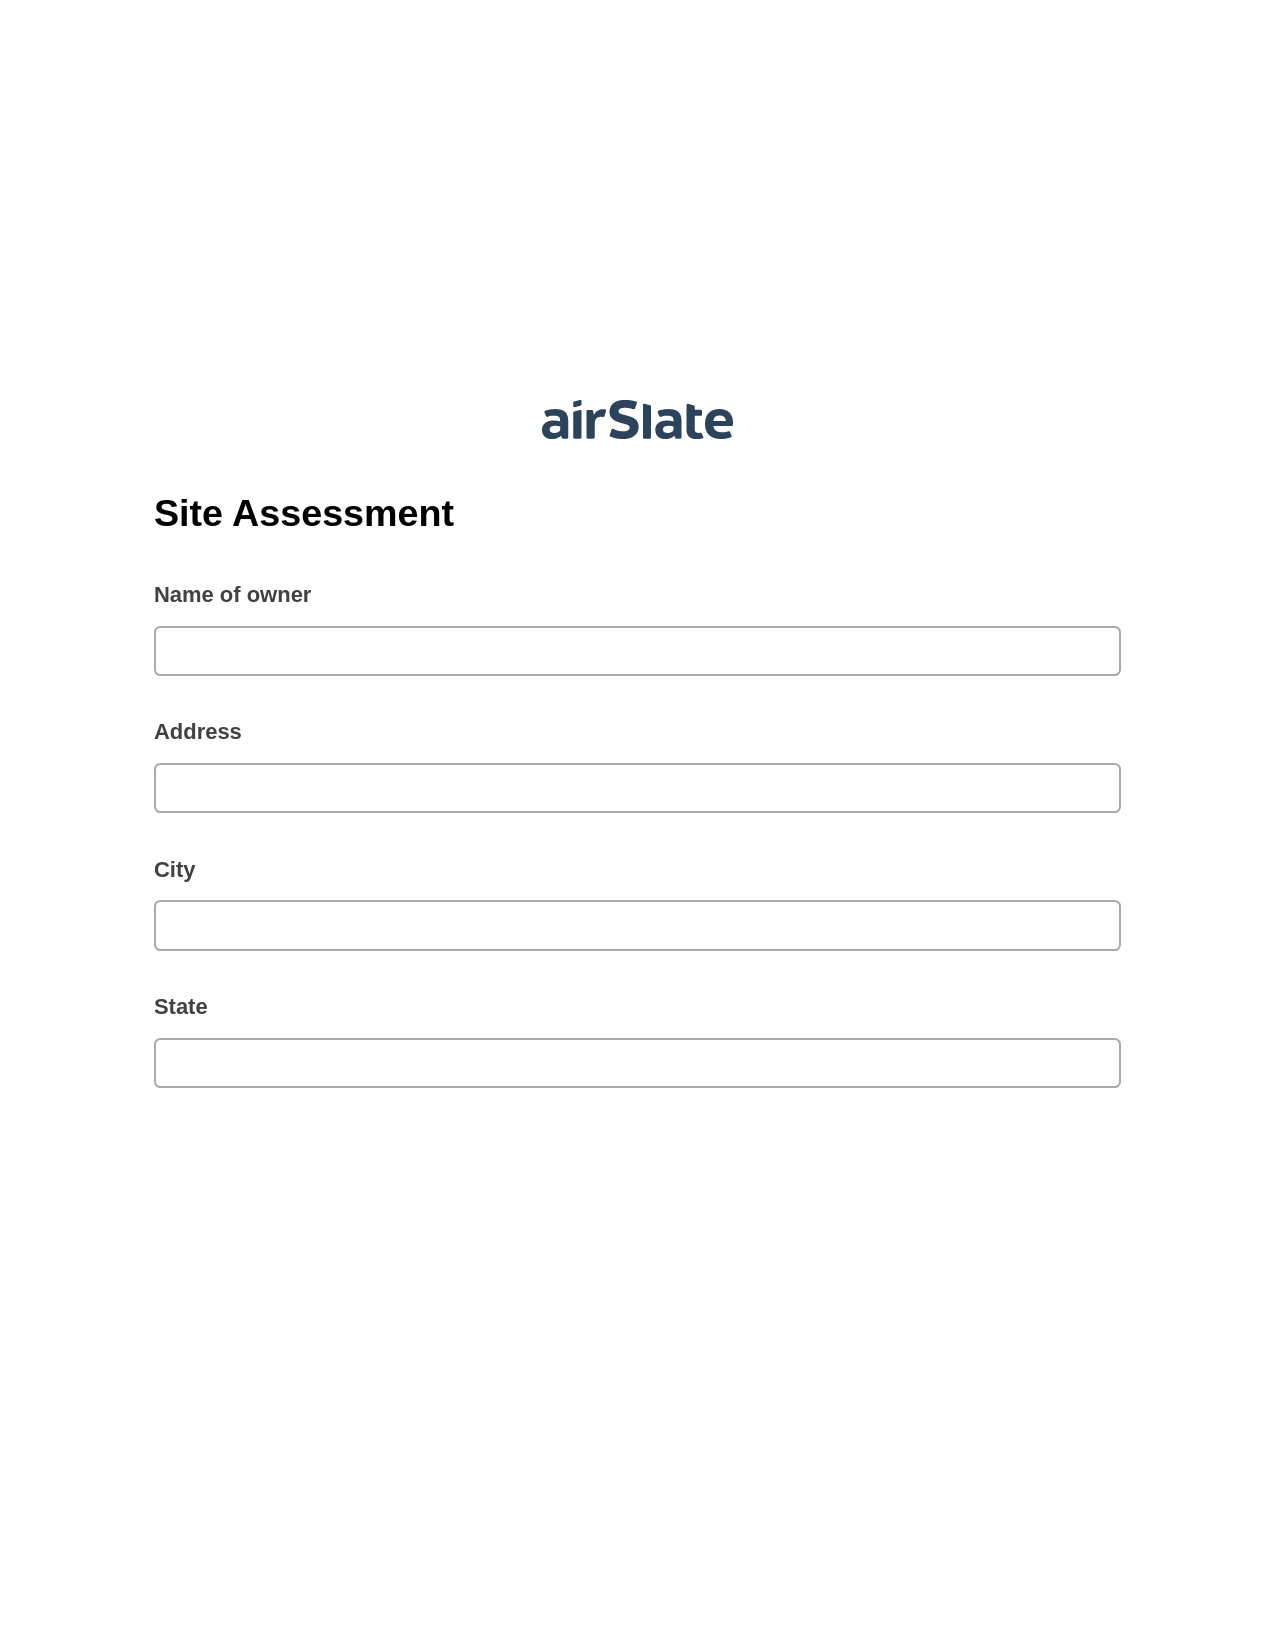 Site Assessment Pre-fill from Excel Spreadsheet Bot, Update Salesforce Record Bot, Email Notification Postfinish Bot